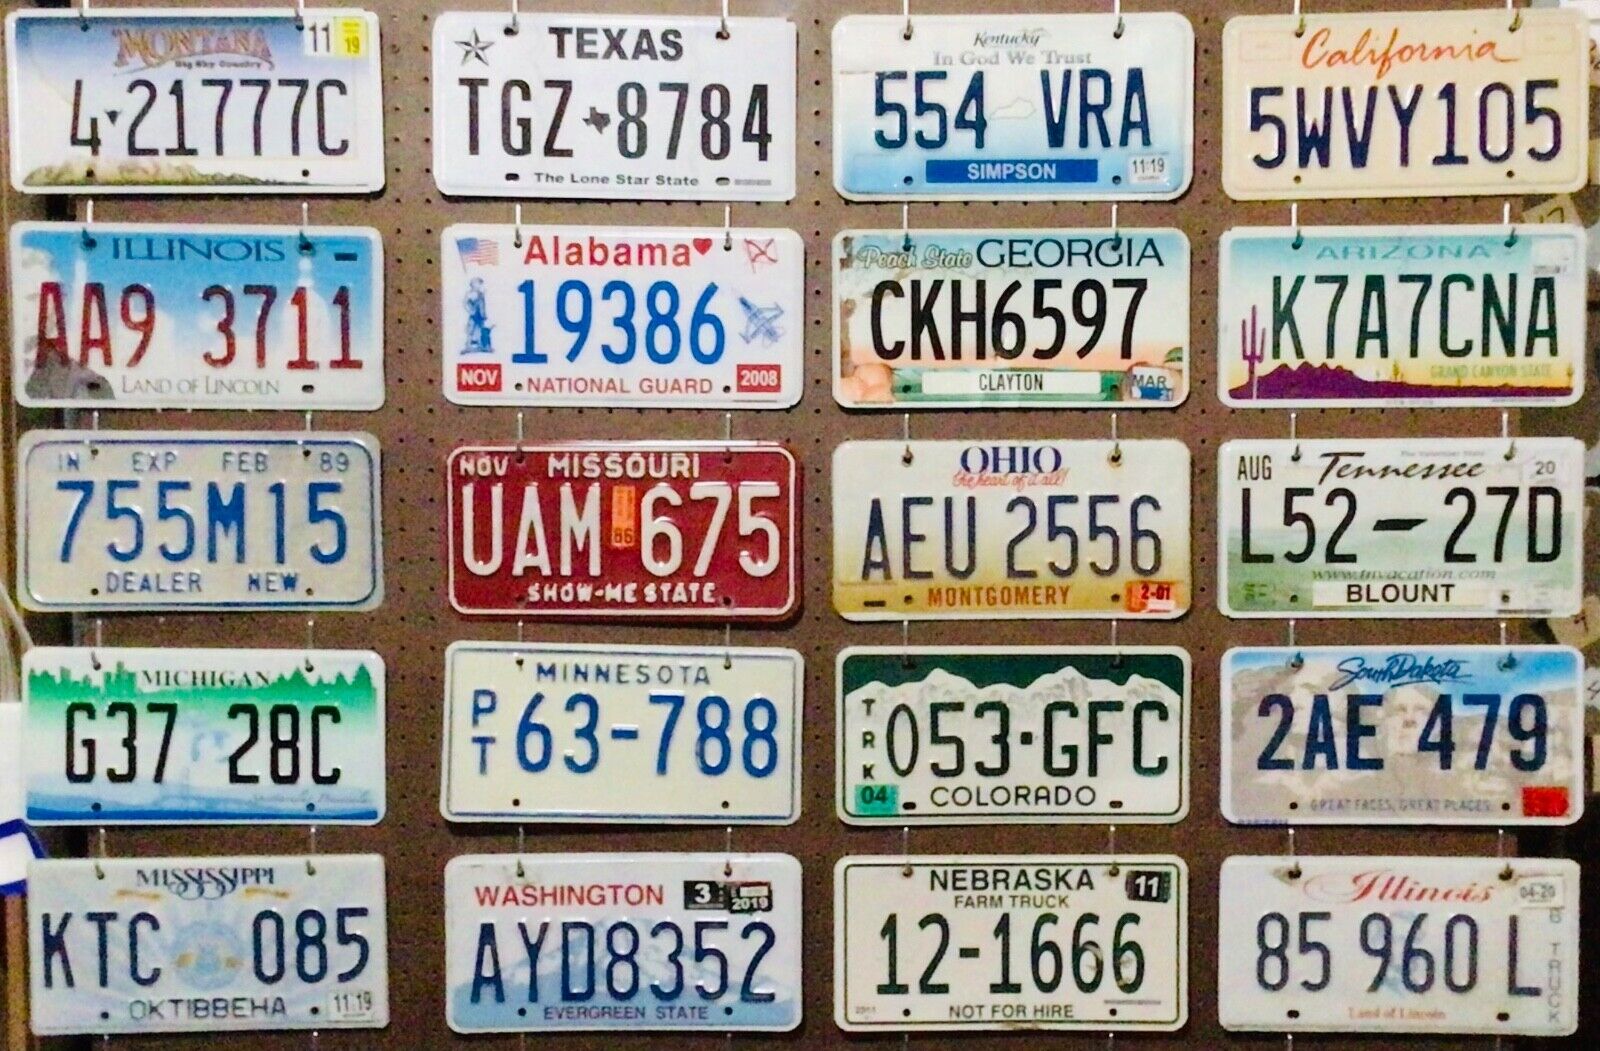 Large lot 20 bulk license plates -LOOK AT MY OTHER LOWER COST SHIPPING LISTINGS